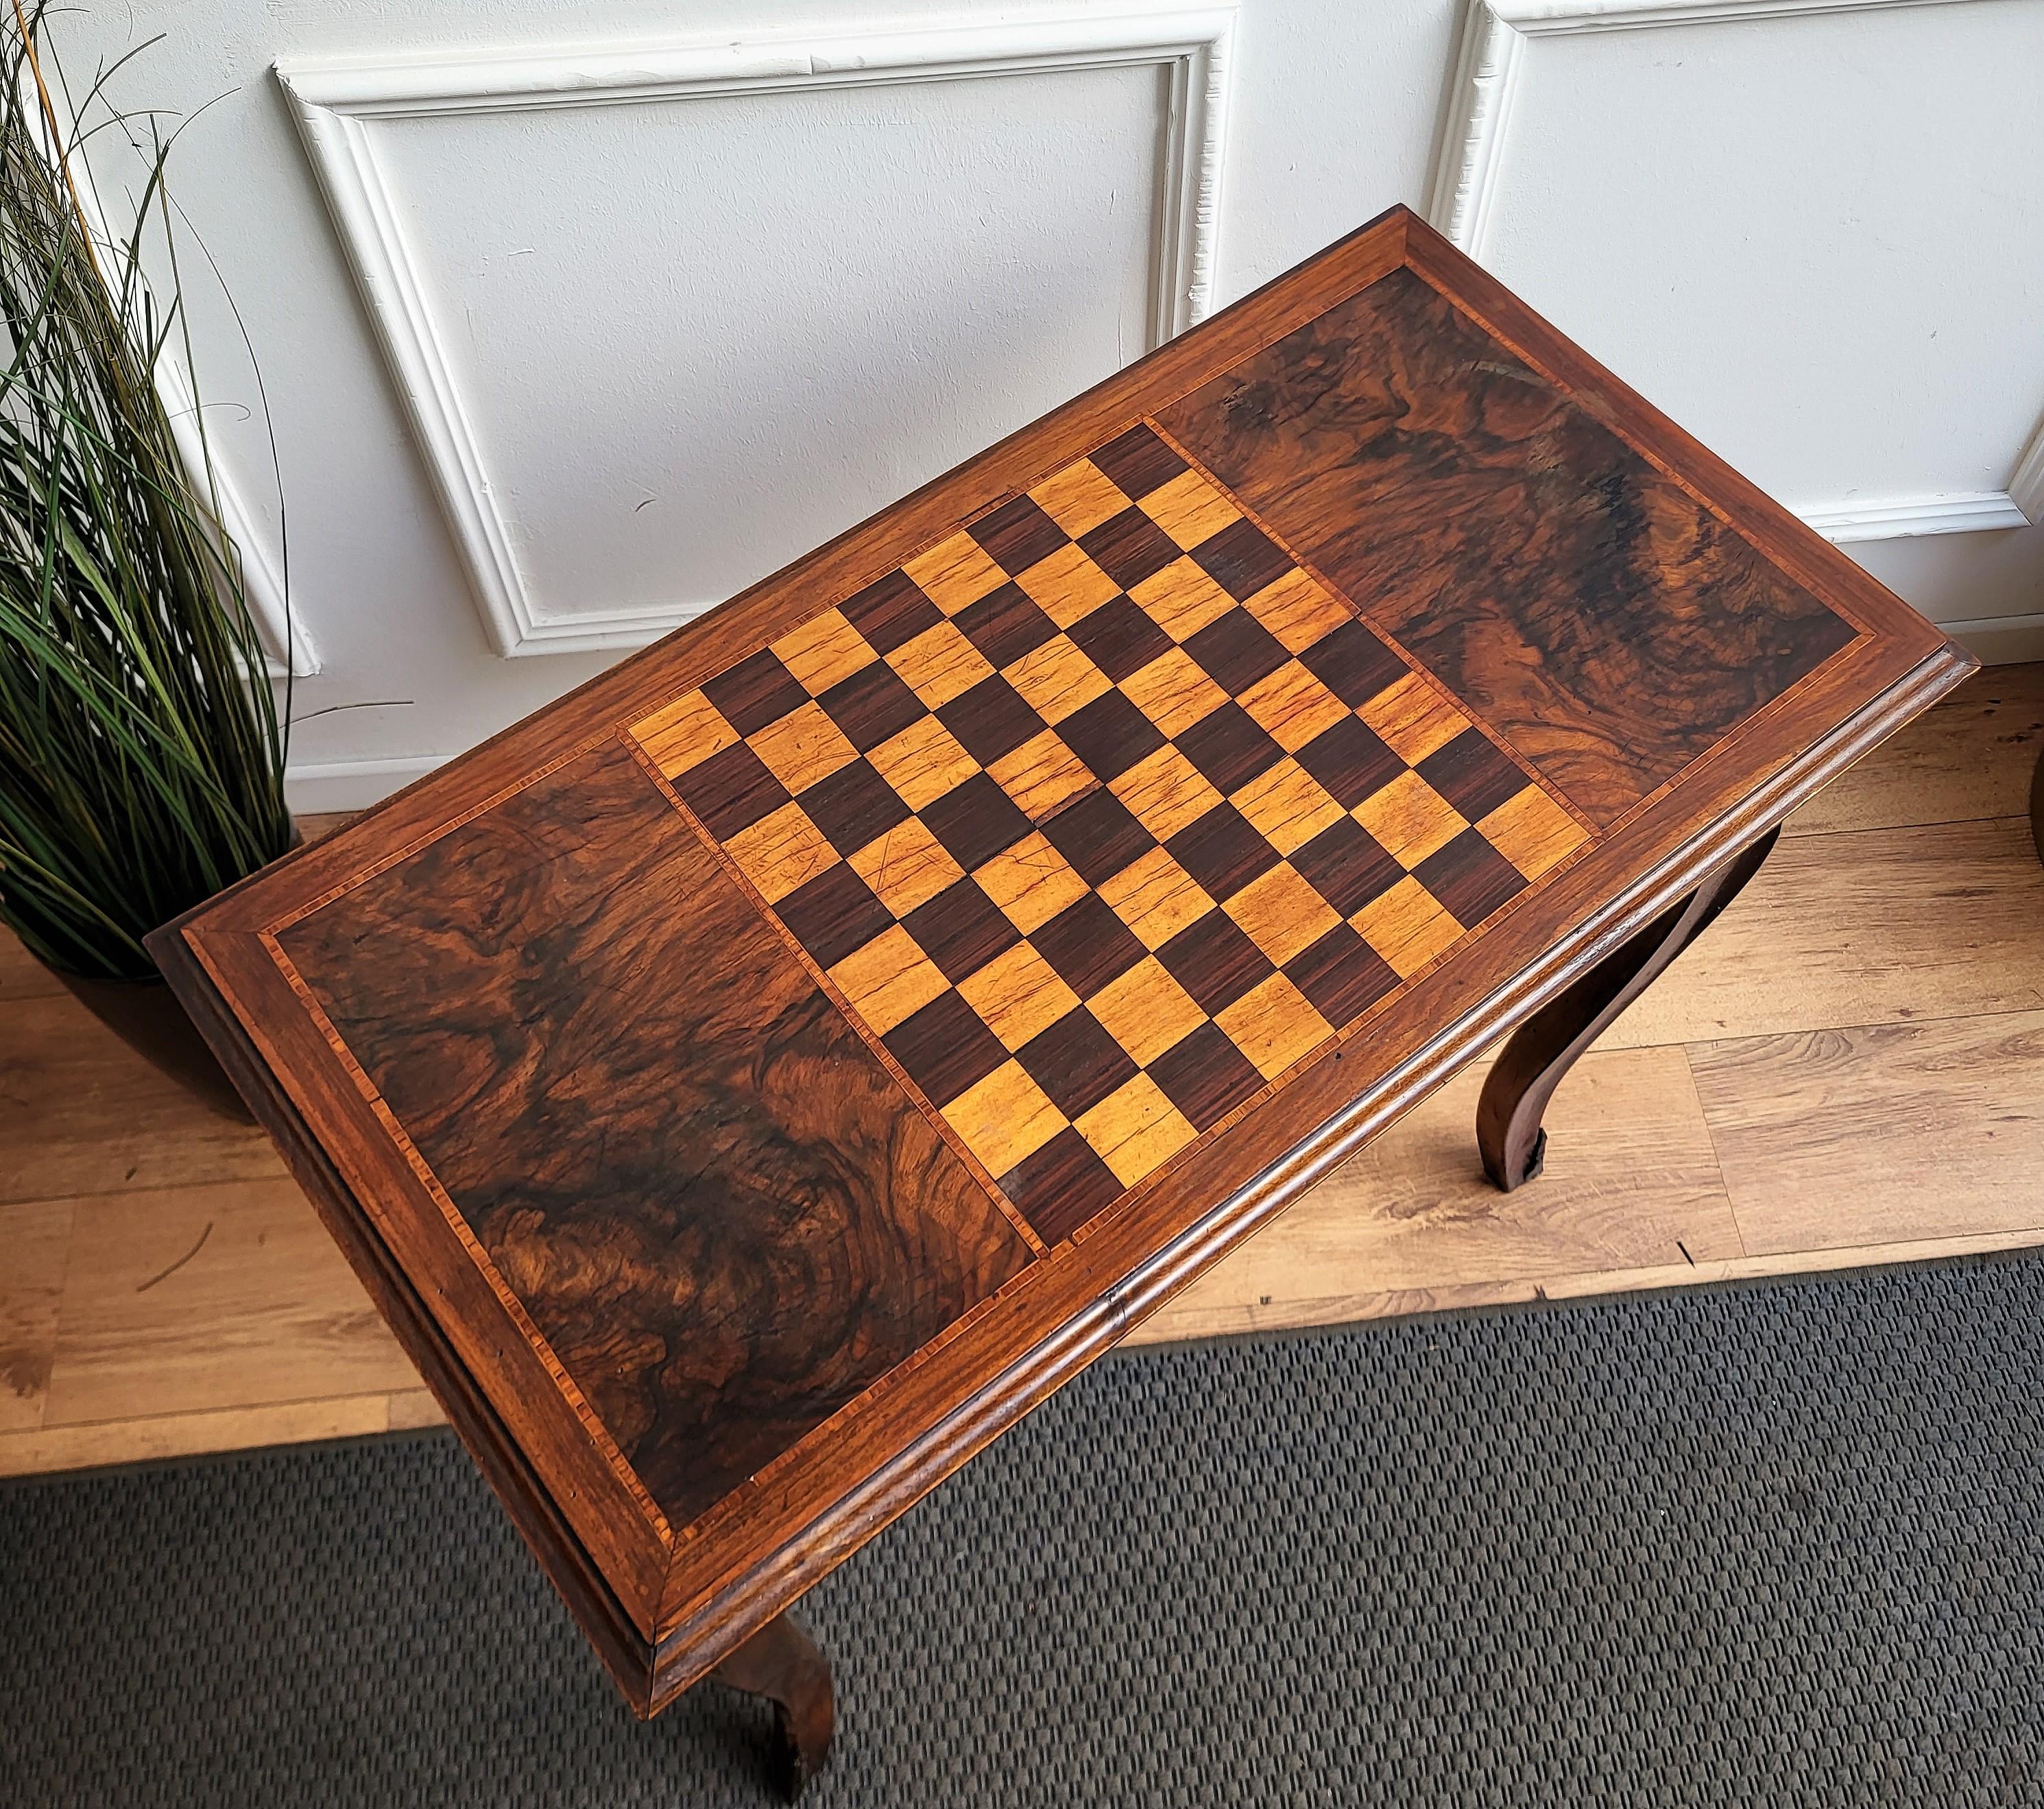 Renaissance Antique Italian Walnut Burl Inlay Chess Games Side Table with Cabriole Legs For Sale